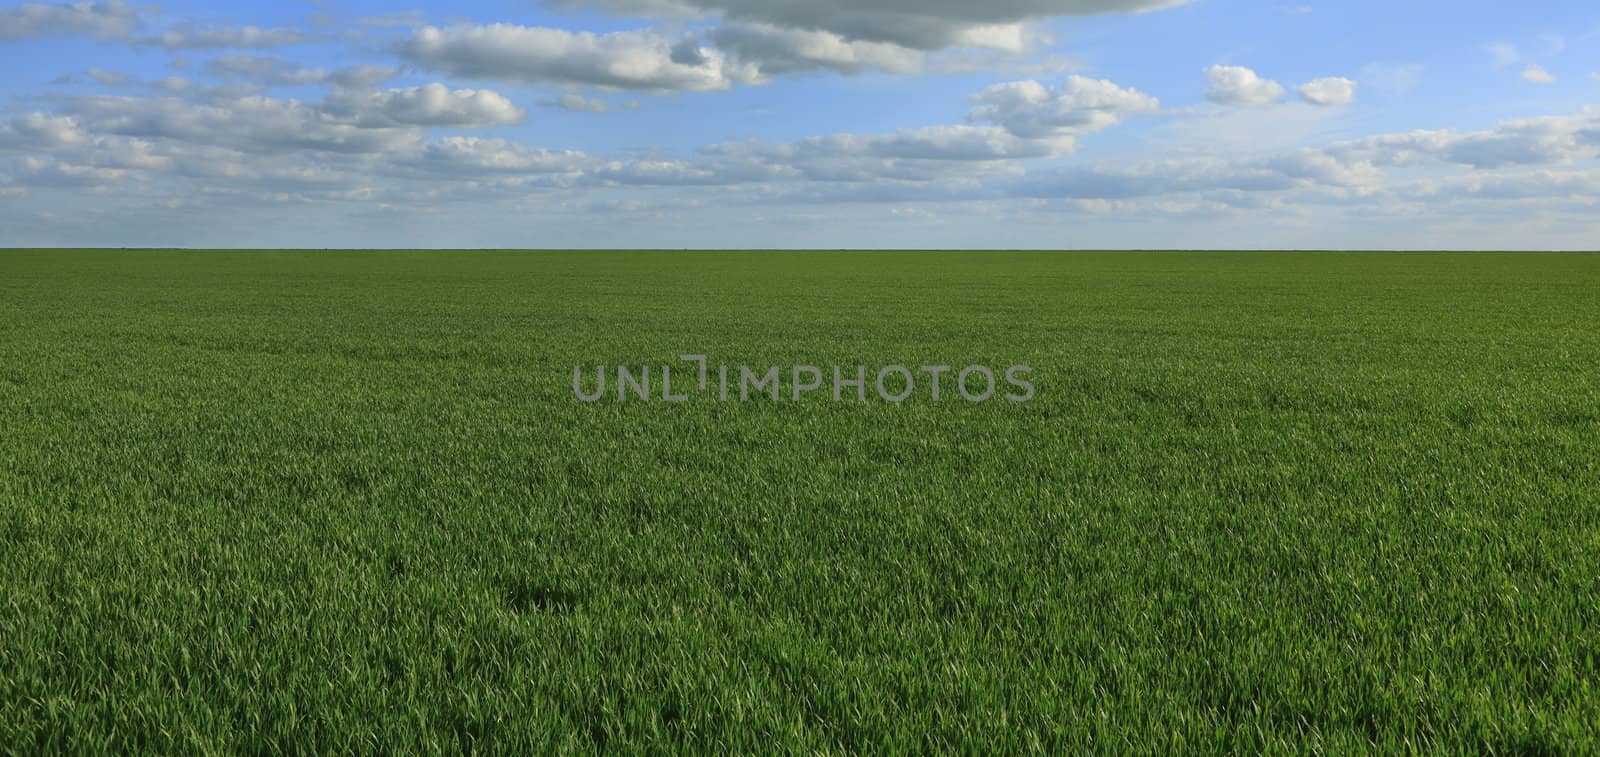 Green cereals field under a cloudy sky.